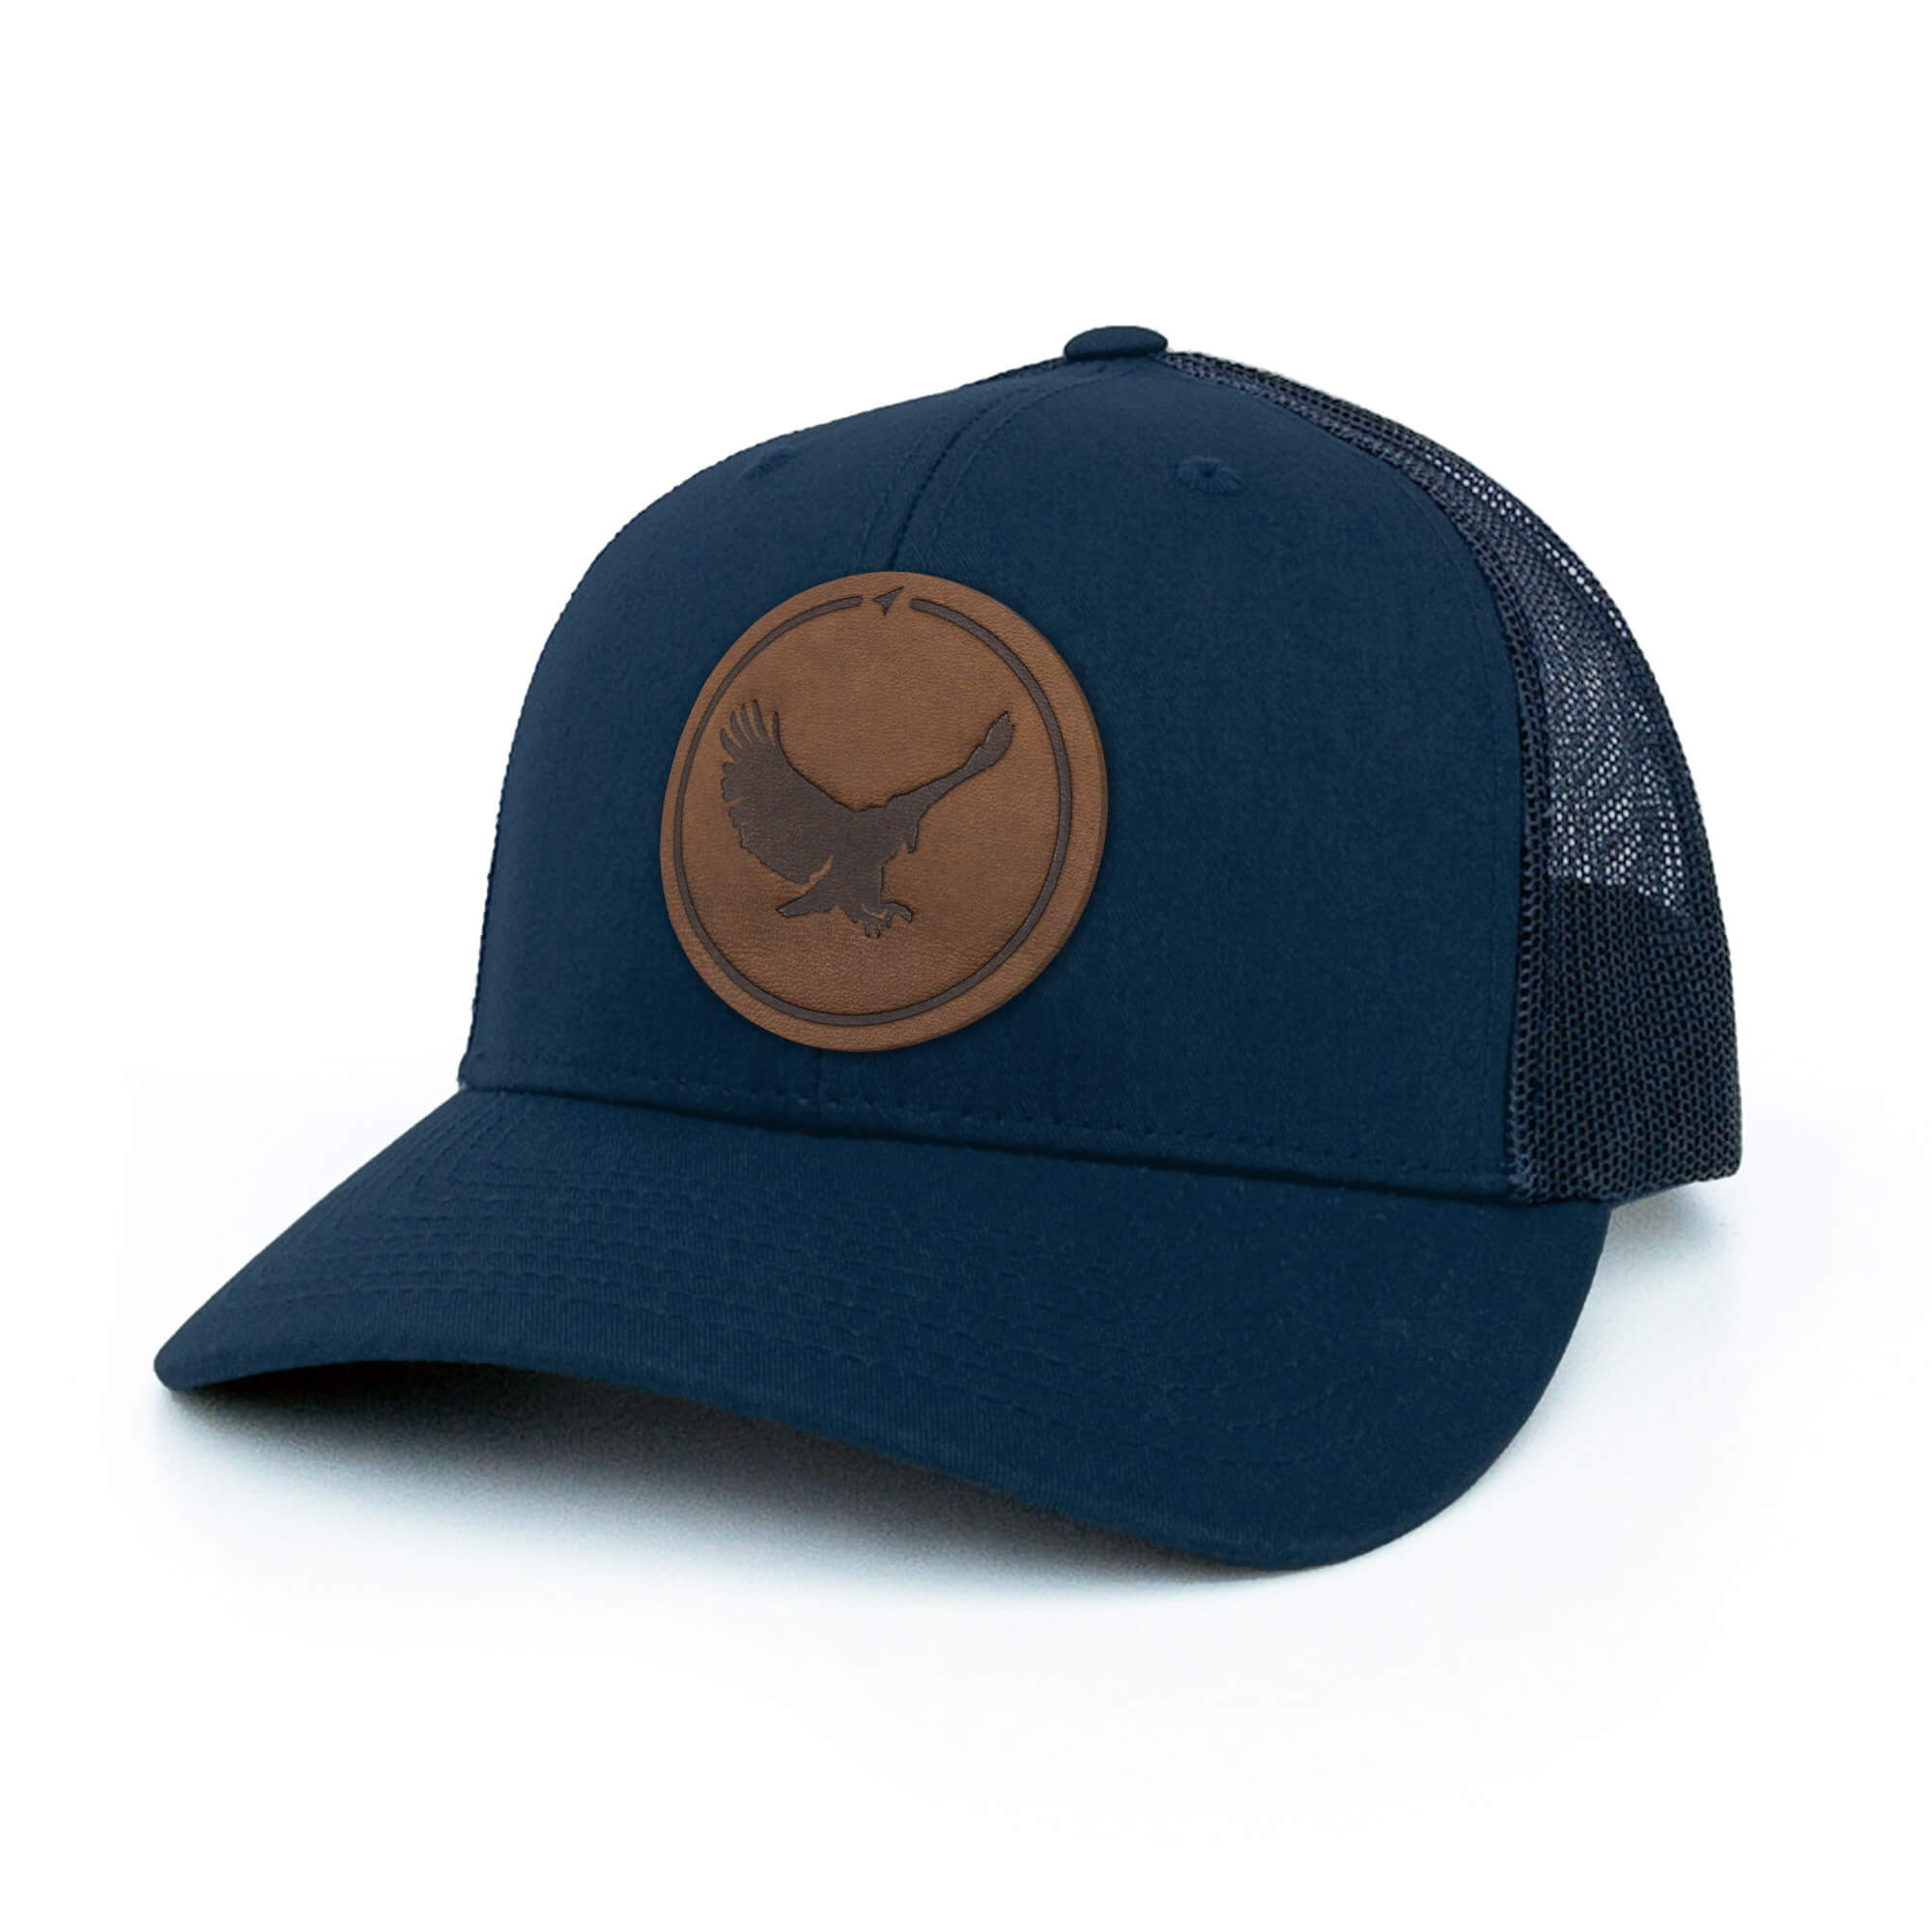 Navy trucker hat with full-grain leather patch of an Eagle | BLACK-004-004, CHARC-004-004, NAVY-004-004, HGREY-004-004, MOSS-004-004, BROWN-004-004